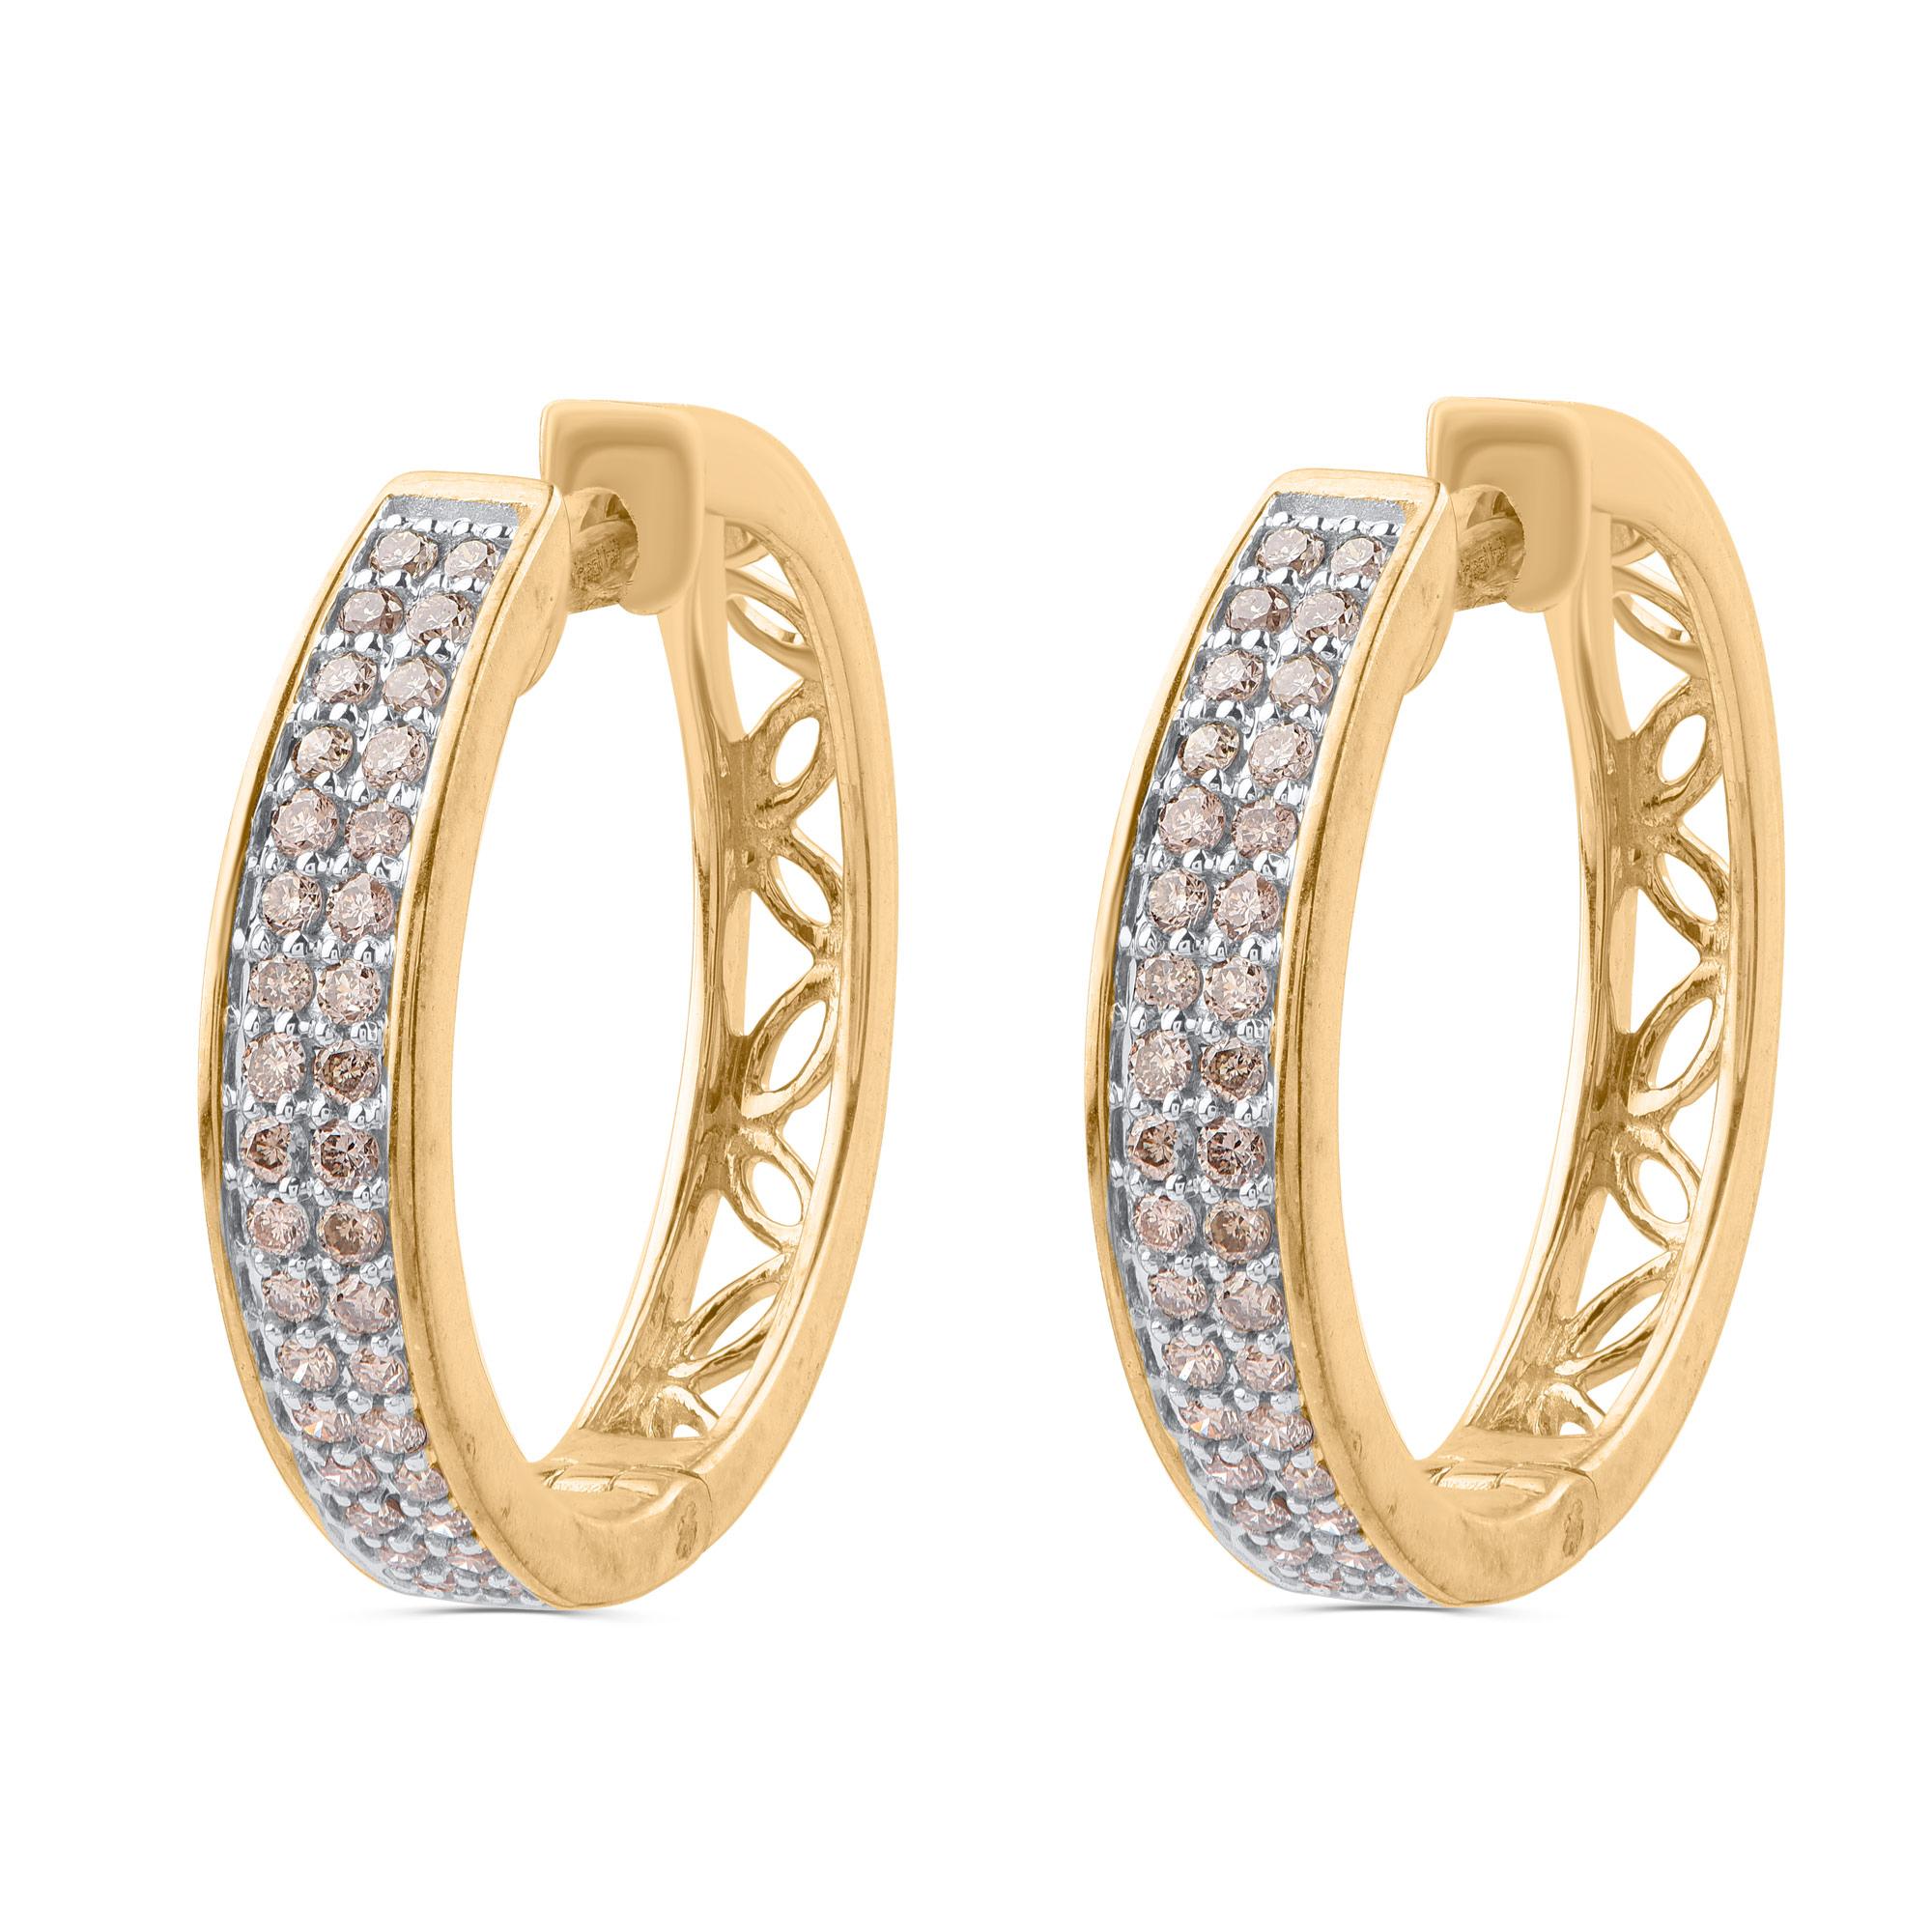 These diamond accented hoop earrings are crafted by our craftsmen in 10 kt yellow gold and embedded with 68 round-cut diamonds beautifully set in micro-pave setting. The diamonds are graded K-L-M Color. These hoop earrings hold comfortably with